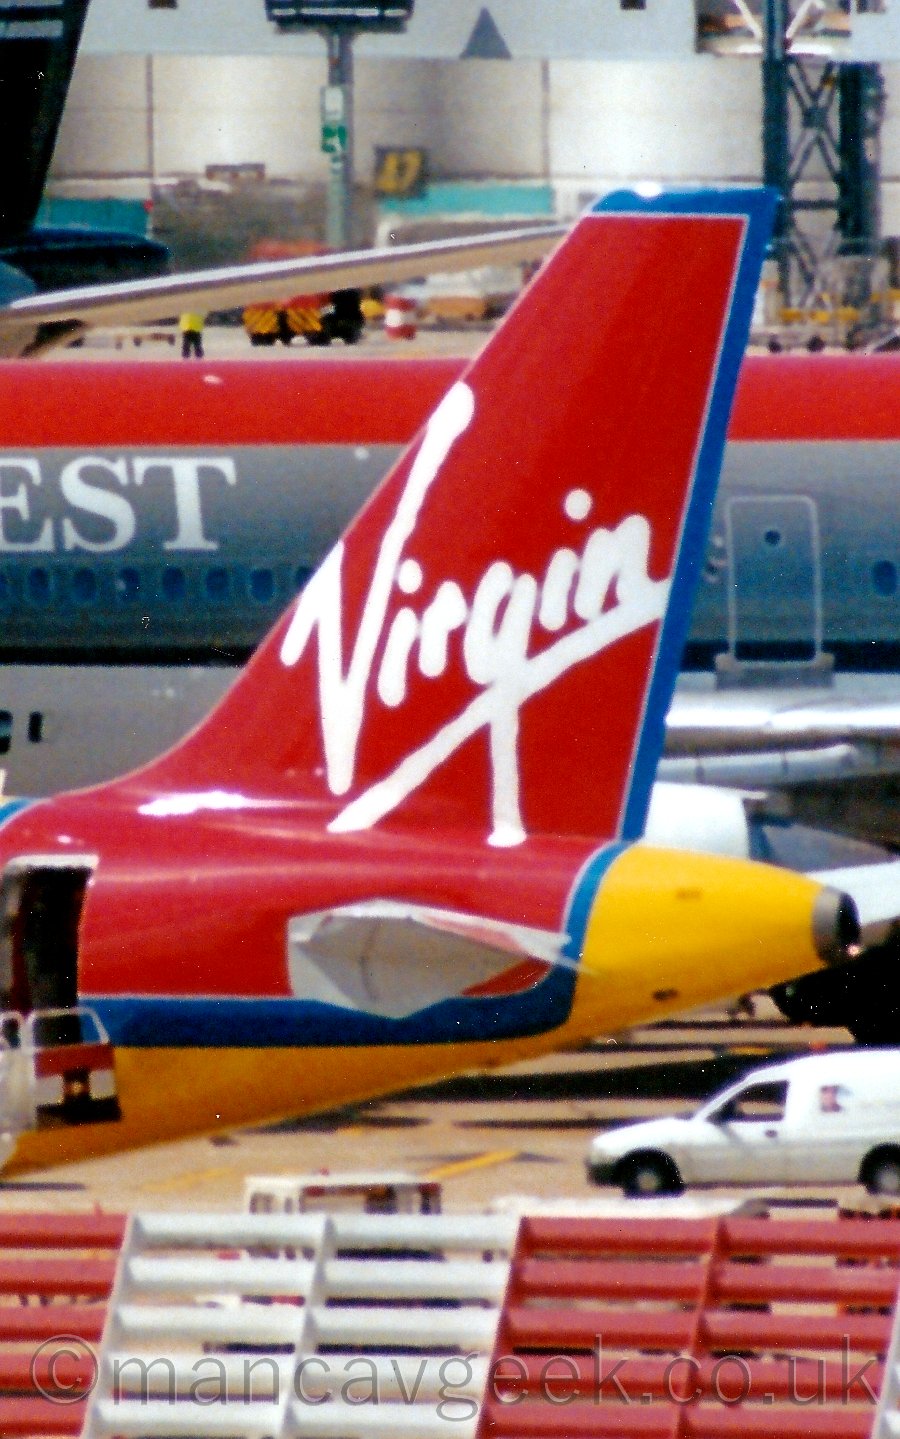 In the background, a large slatted metal barrier painted in alternating red and white sections fills the bottom of the screen, through which some vehicles can be see clustered around this plane. In the background, a red, grey, and white plane fills most of the rest of the frame, with a grey airport building in the distance filling what is left.